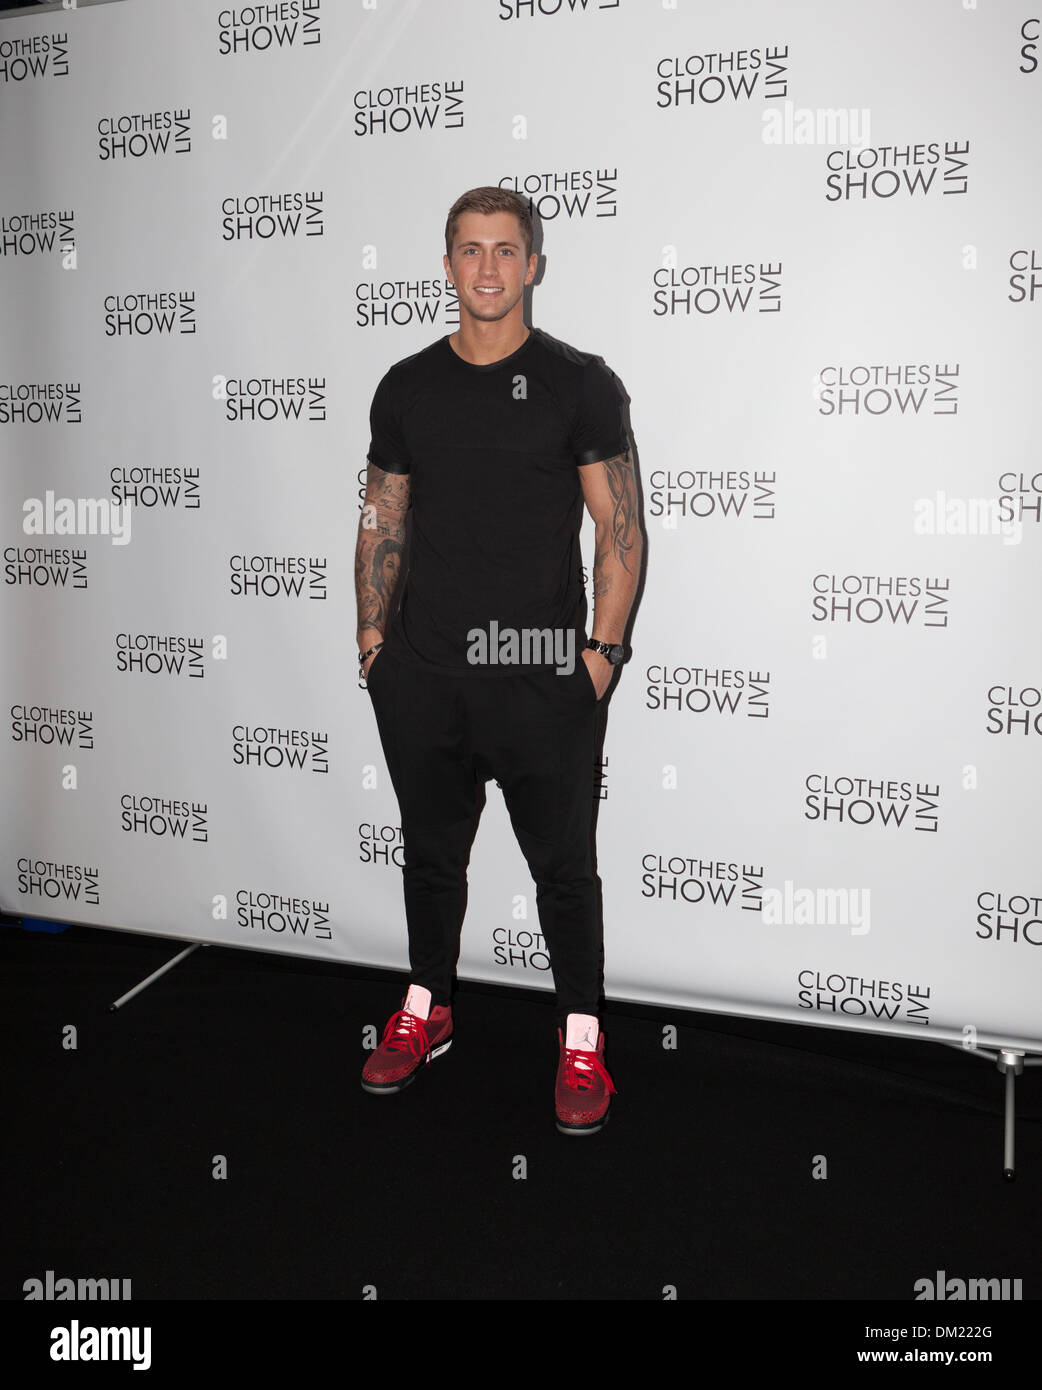 Birmingham, UK. 10th December 2013. Danny Osborne is a start of ITVs The Only Way is Essex (TOWIE) pictured here at the Clothes Show Live promoting his new calender launch Credit:  Paul Hastie/Alamy Live News Stock Photo